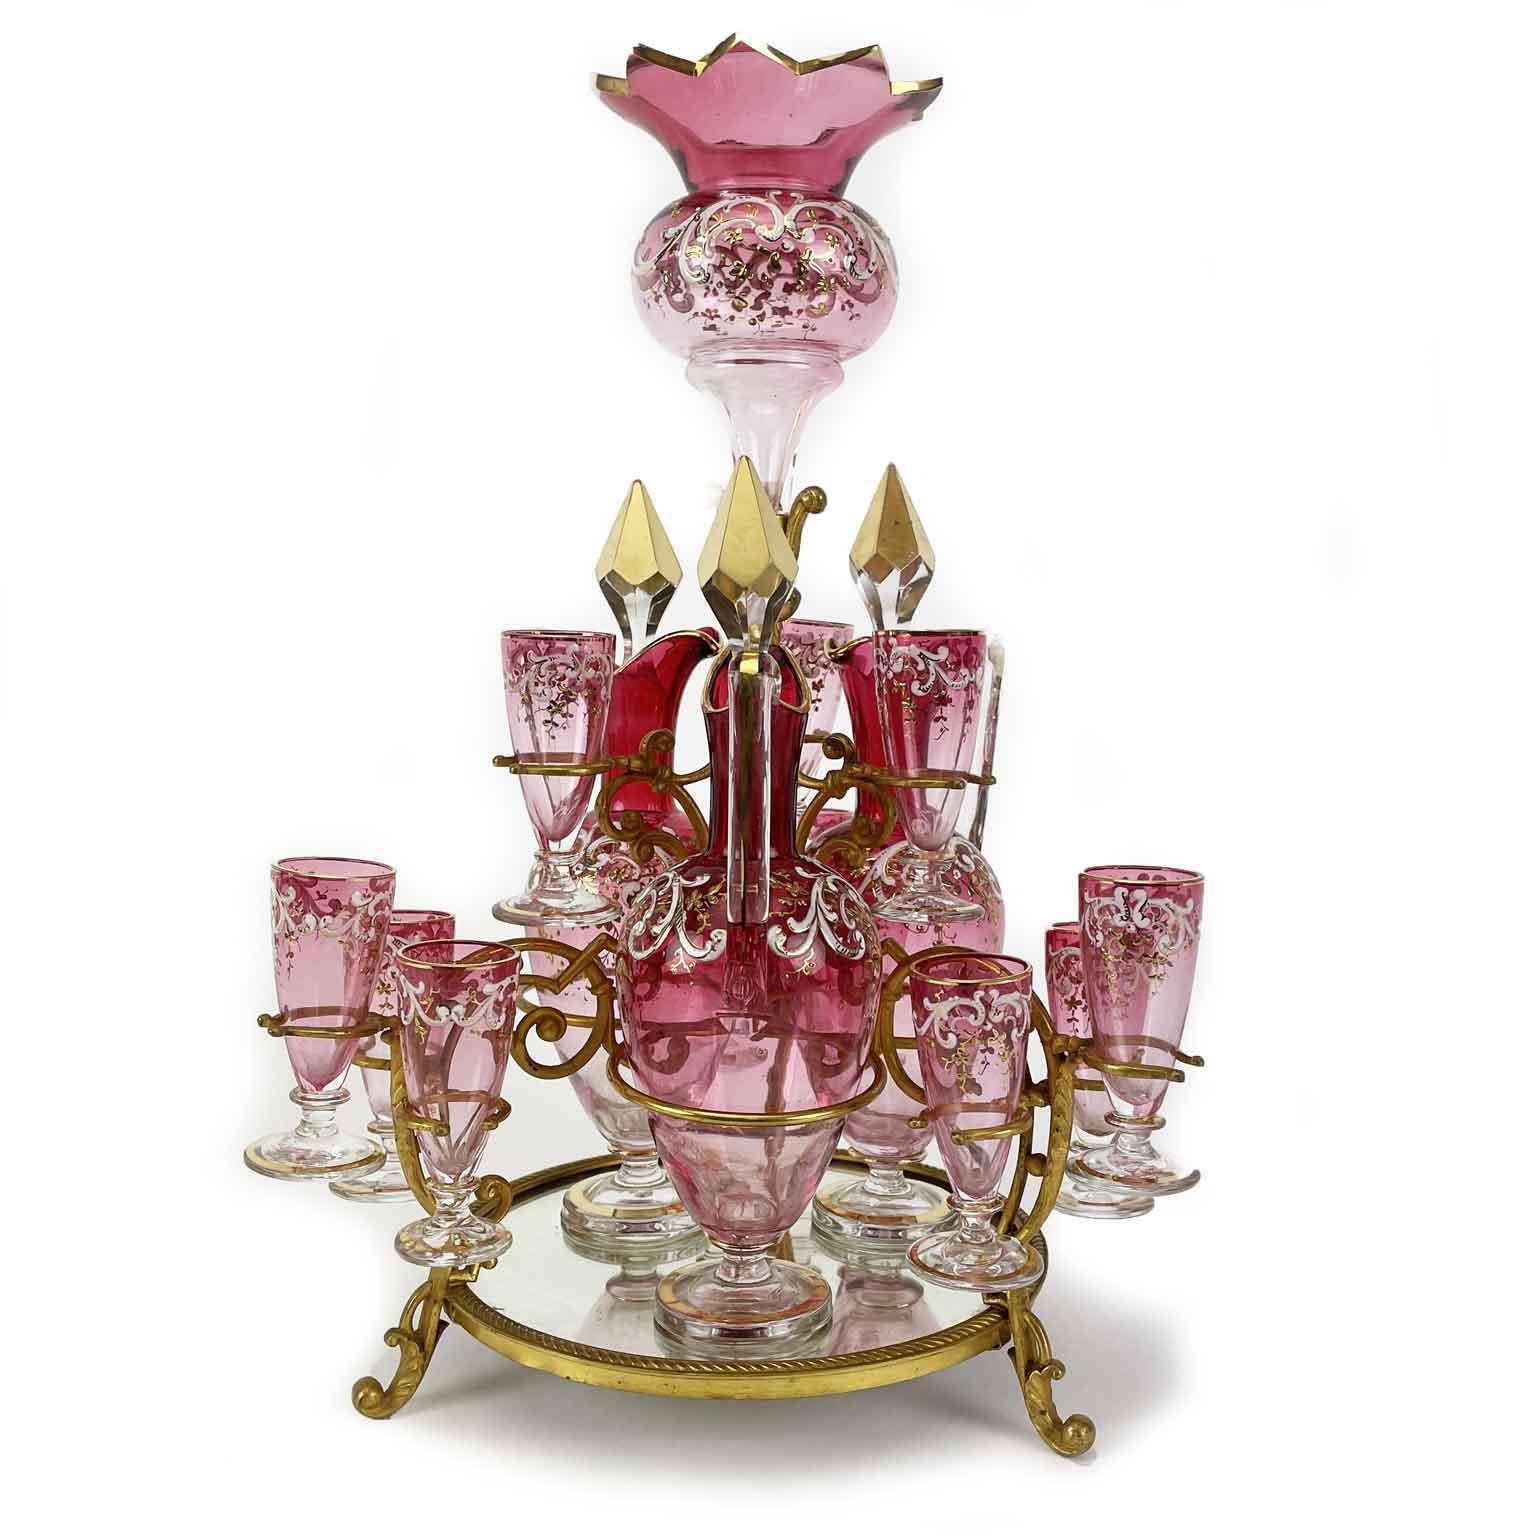 Antique late-19th century Italian exquisite glass liqueur set, consisting of three liqueur bottles, 3 decanters with stoppers, twelve small glasses arranged on two tier. This antique Italian tantalus has a circular pyramidal frame, an elegant gilt